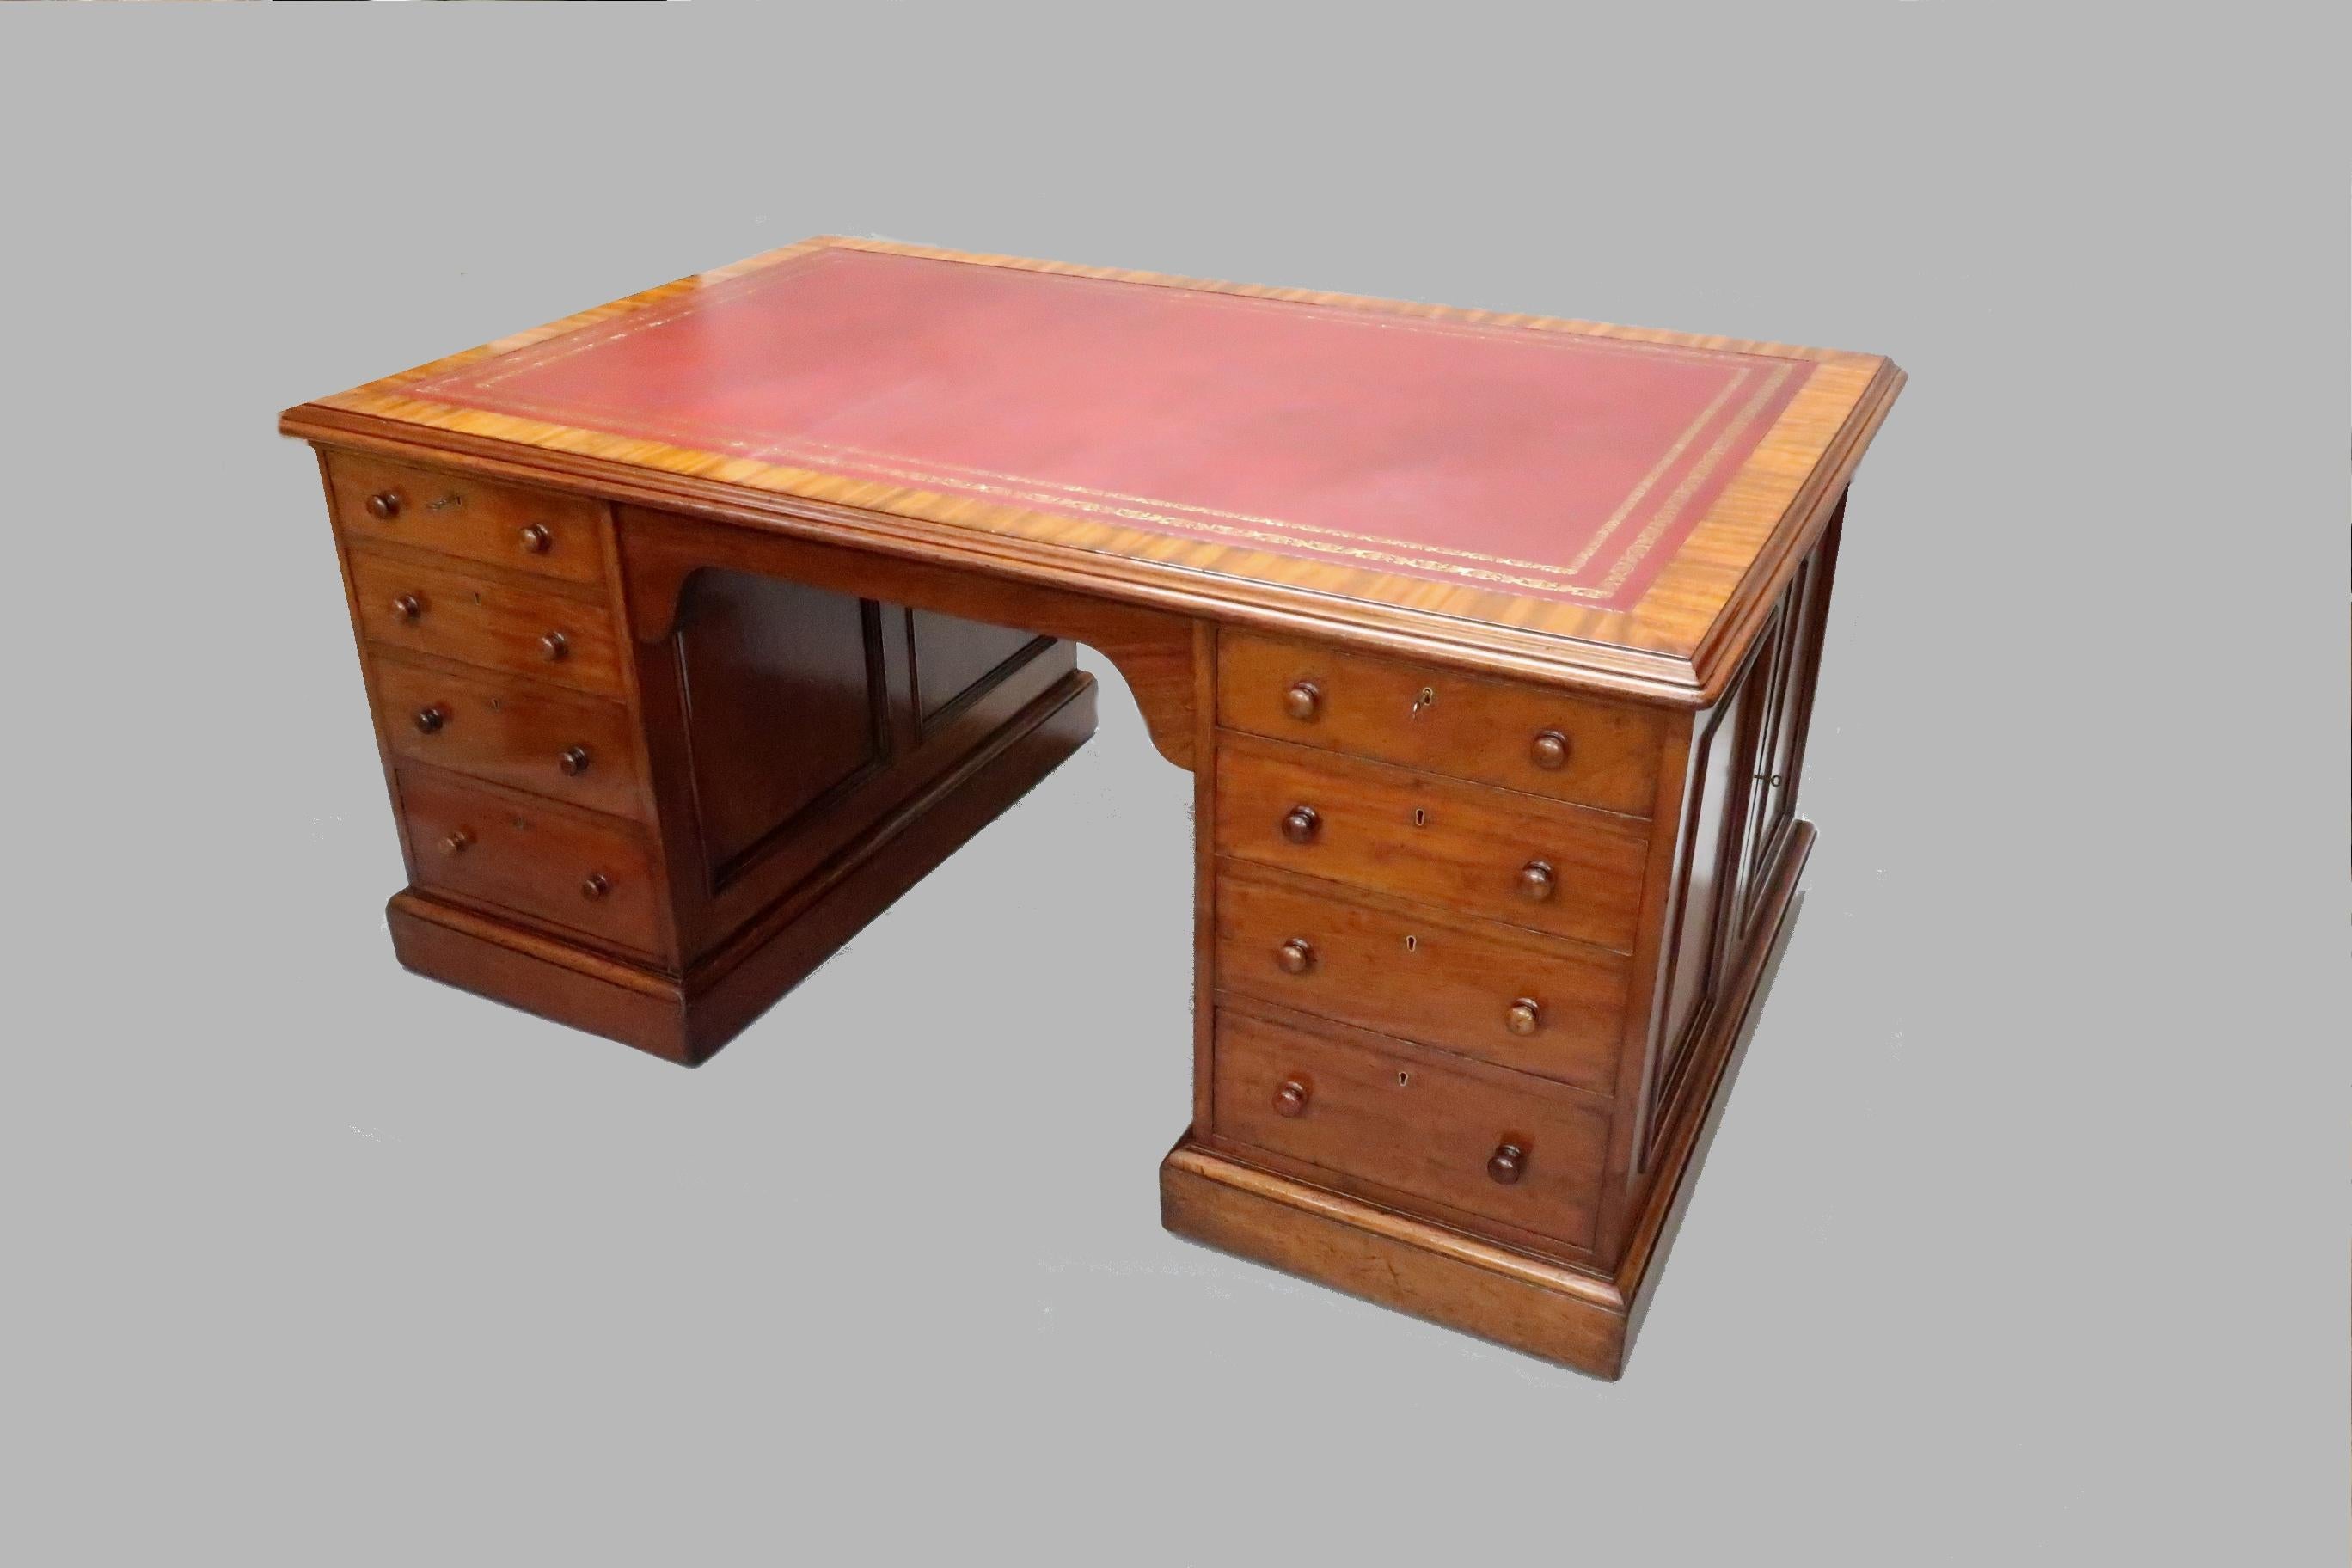 A very good quality Victorian figured mahogany partners pedestal kneehole writing desk with eight drawers to the front and cupboards to the sides. The top has a mahogany crossbanded border with a maroon leather hide finished with gilt tooling and